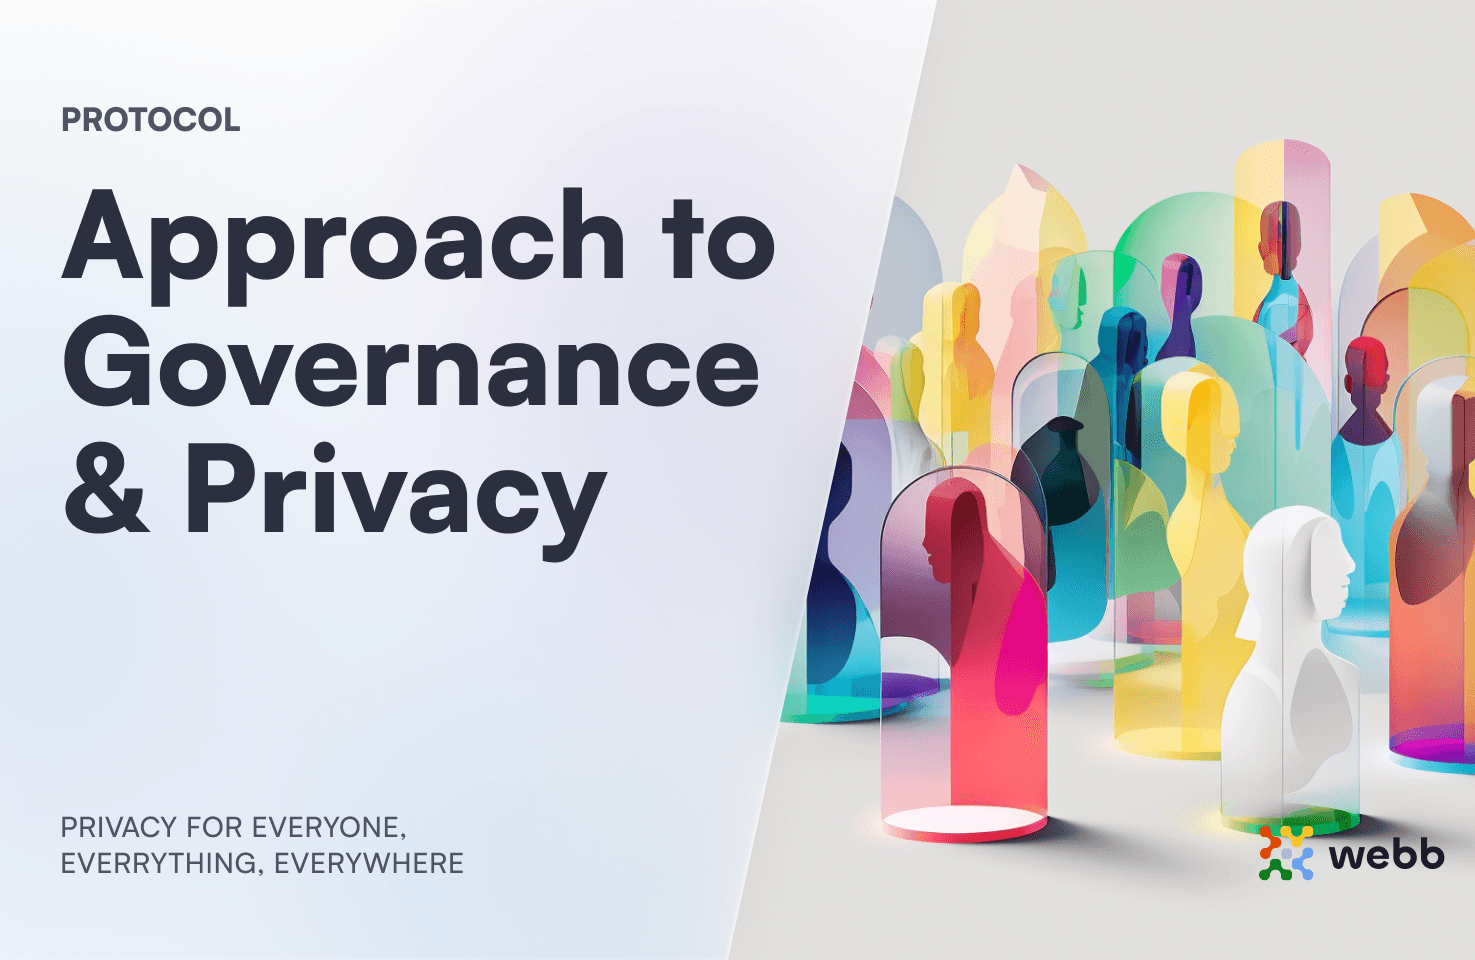 Webb’s Approach to Governance and Privacy